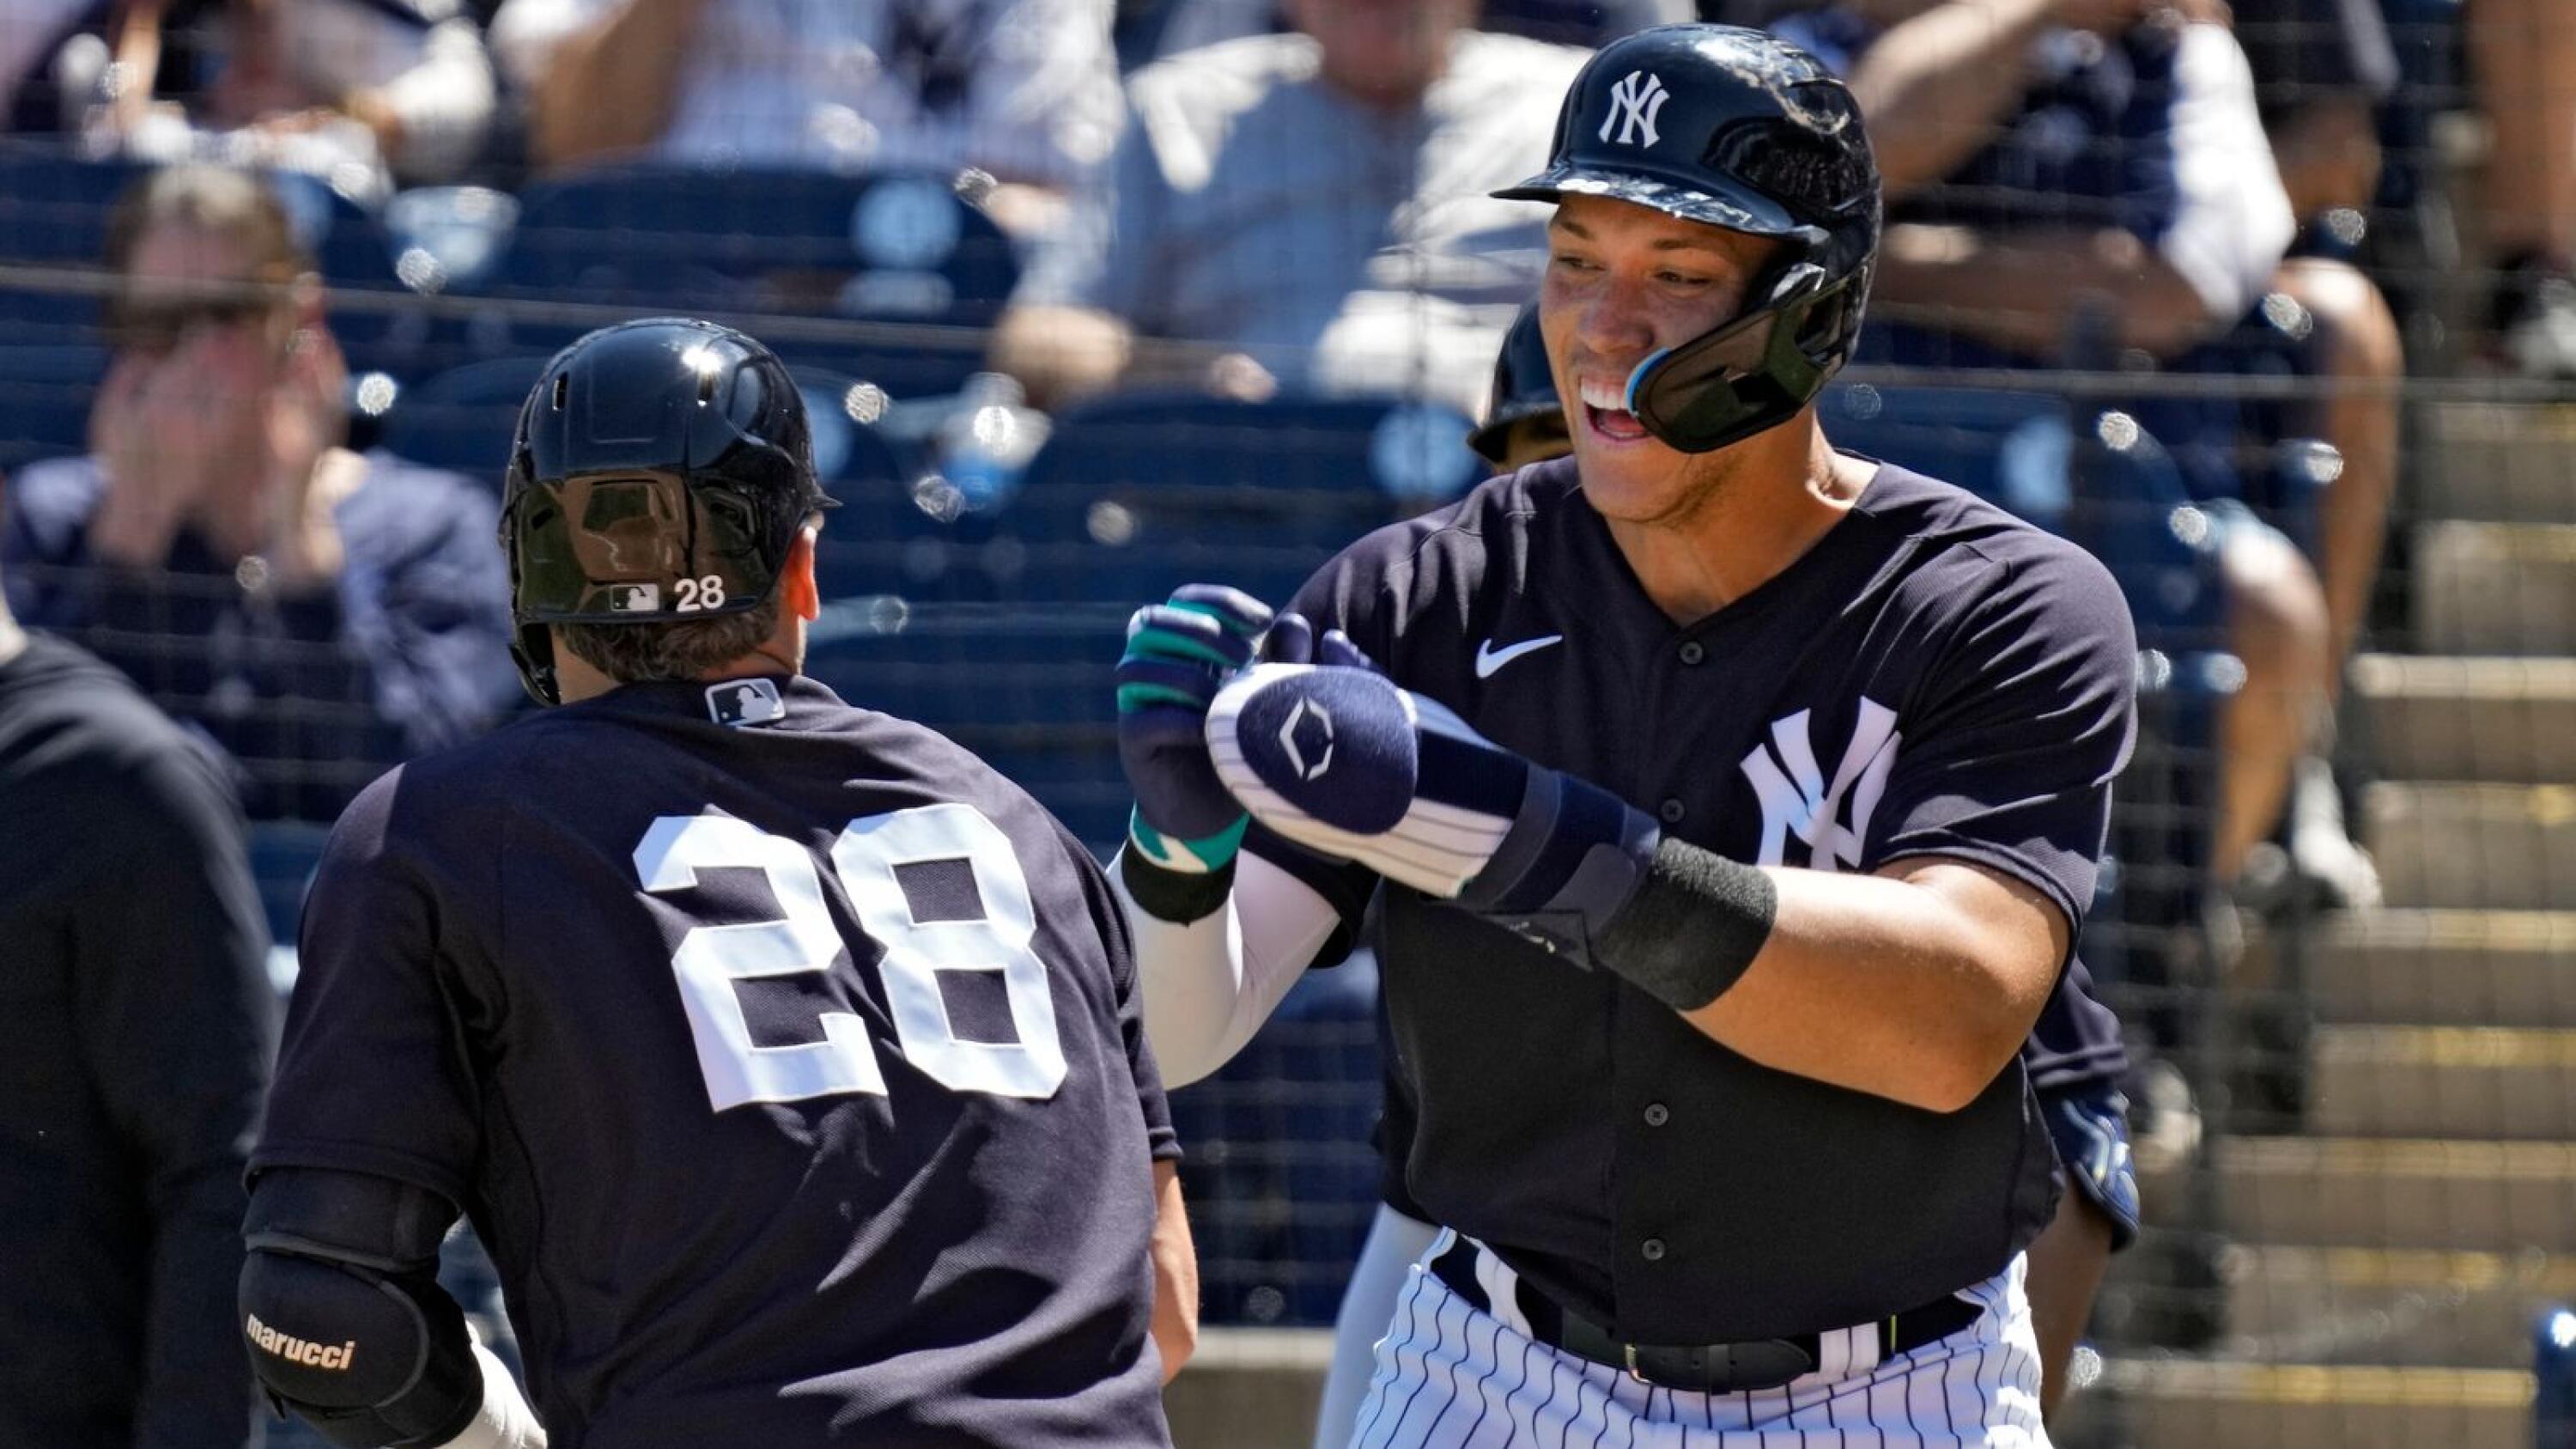 AL East Preview: Judge, Yankees lead MLB's deepest division